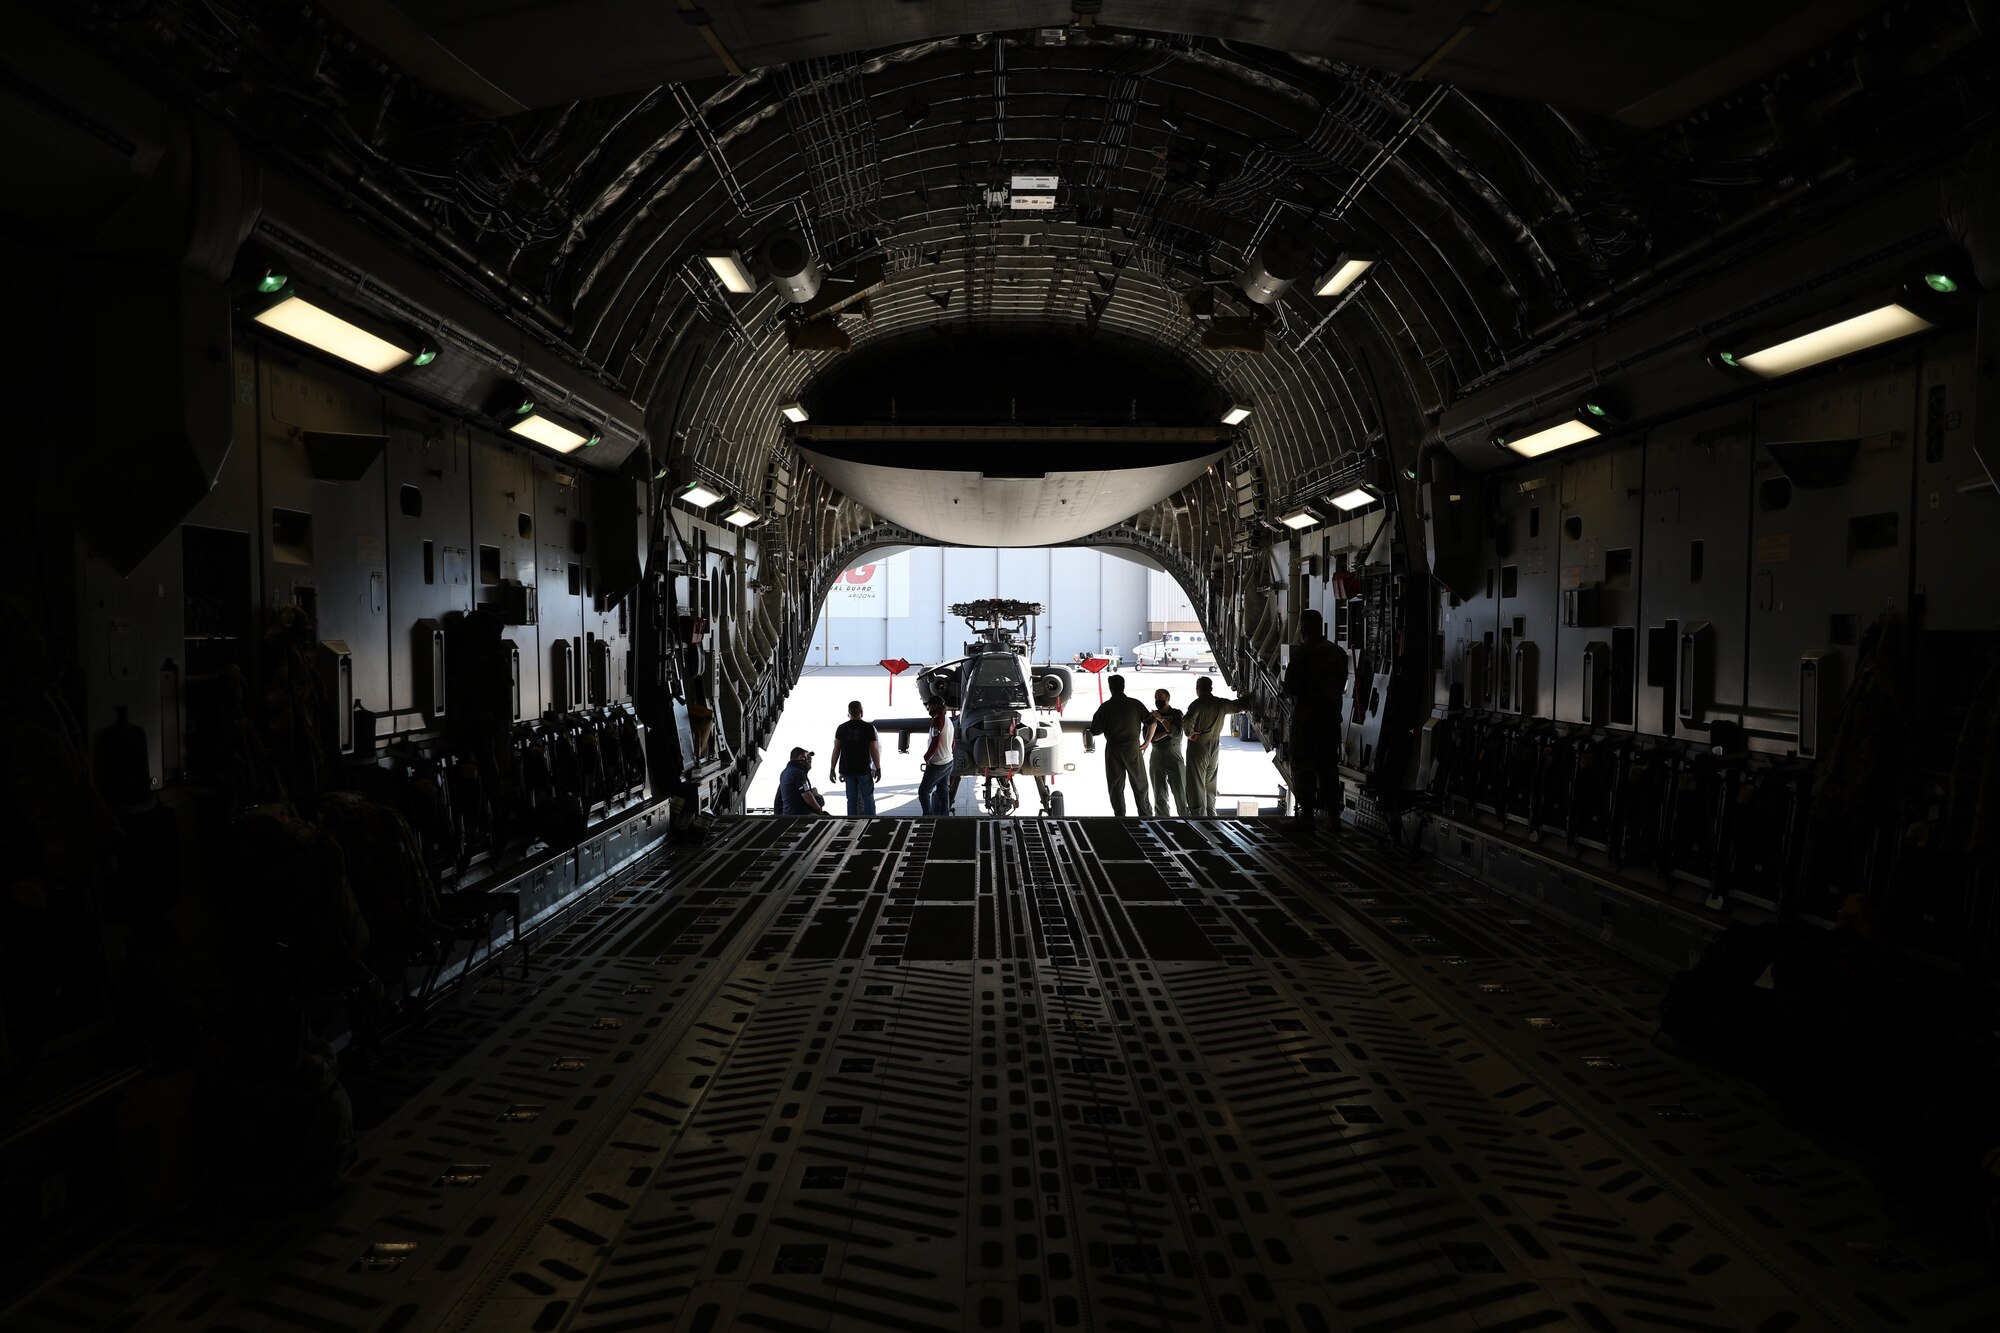 Members of the Arizona National Guard’s 161st Air Refueling Wing, the Royal Air Force, and The Boeing Company load an AH-64 Apache helicopter into a Royal Air Force C-17 Globemaster III, at the Goldwater Air National Guard Base in Phoenix, Arizona Jan. 21, 2021. The 161st was contacted by the U.S. Army’s Apache foreign military sales program office to help load the attack helicopters on C-17 aircraft for shipment to the UK, due to its secure ramp space for the project, and qualified air transportation specialists who can process complex air cargo ensuring safety of flight during air transport.  (U.S. Army National Guard photo by Spc. Thurman Snyder)